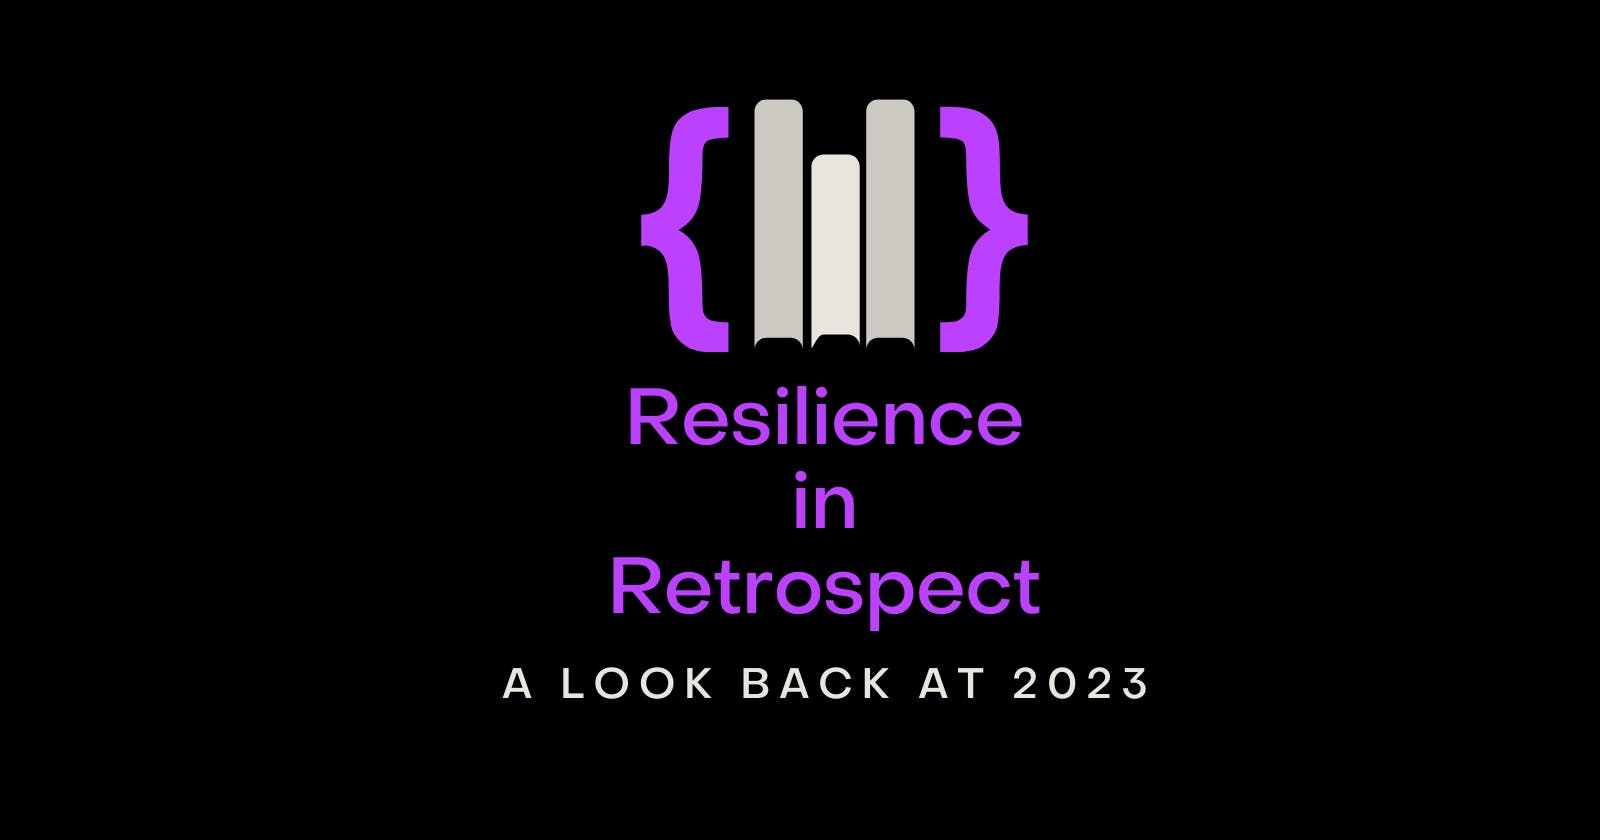 Resilience in Retrospect: A Look Back at 2023